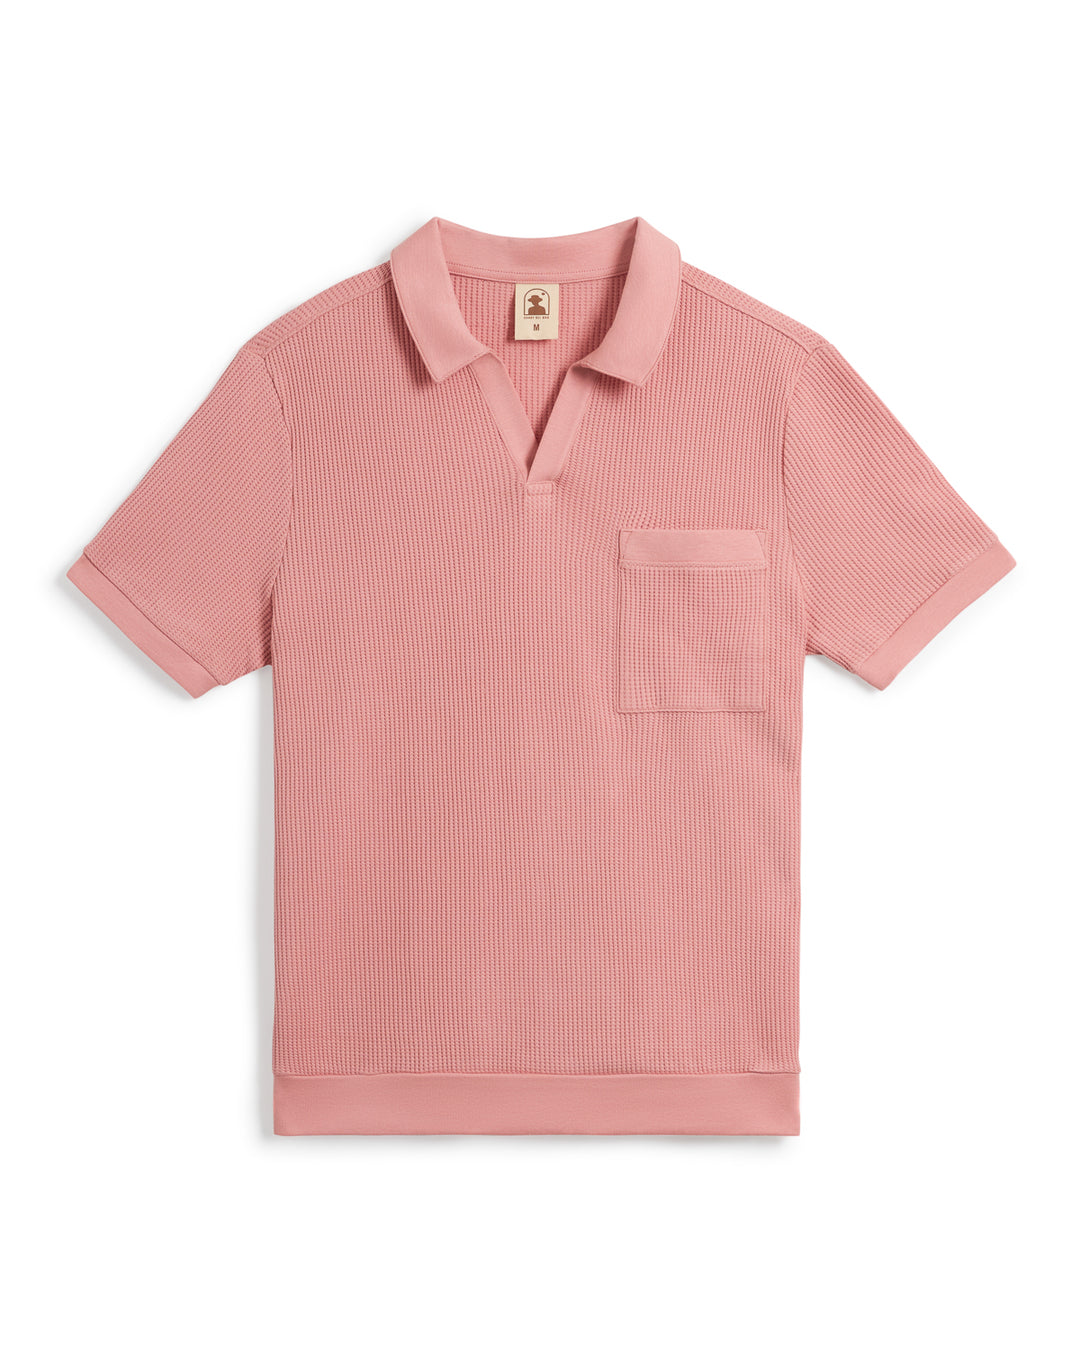 A pink short-sleeve The Cannes Waffle Knit Shirt - Spanish Rose from Dandy Del Mar with waffle knit fabric, a V-neckline, and a chest pocket.